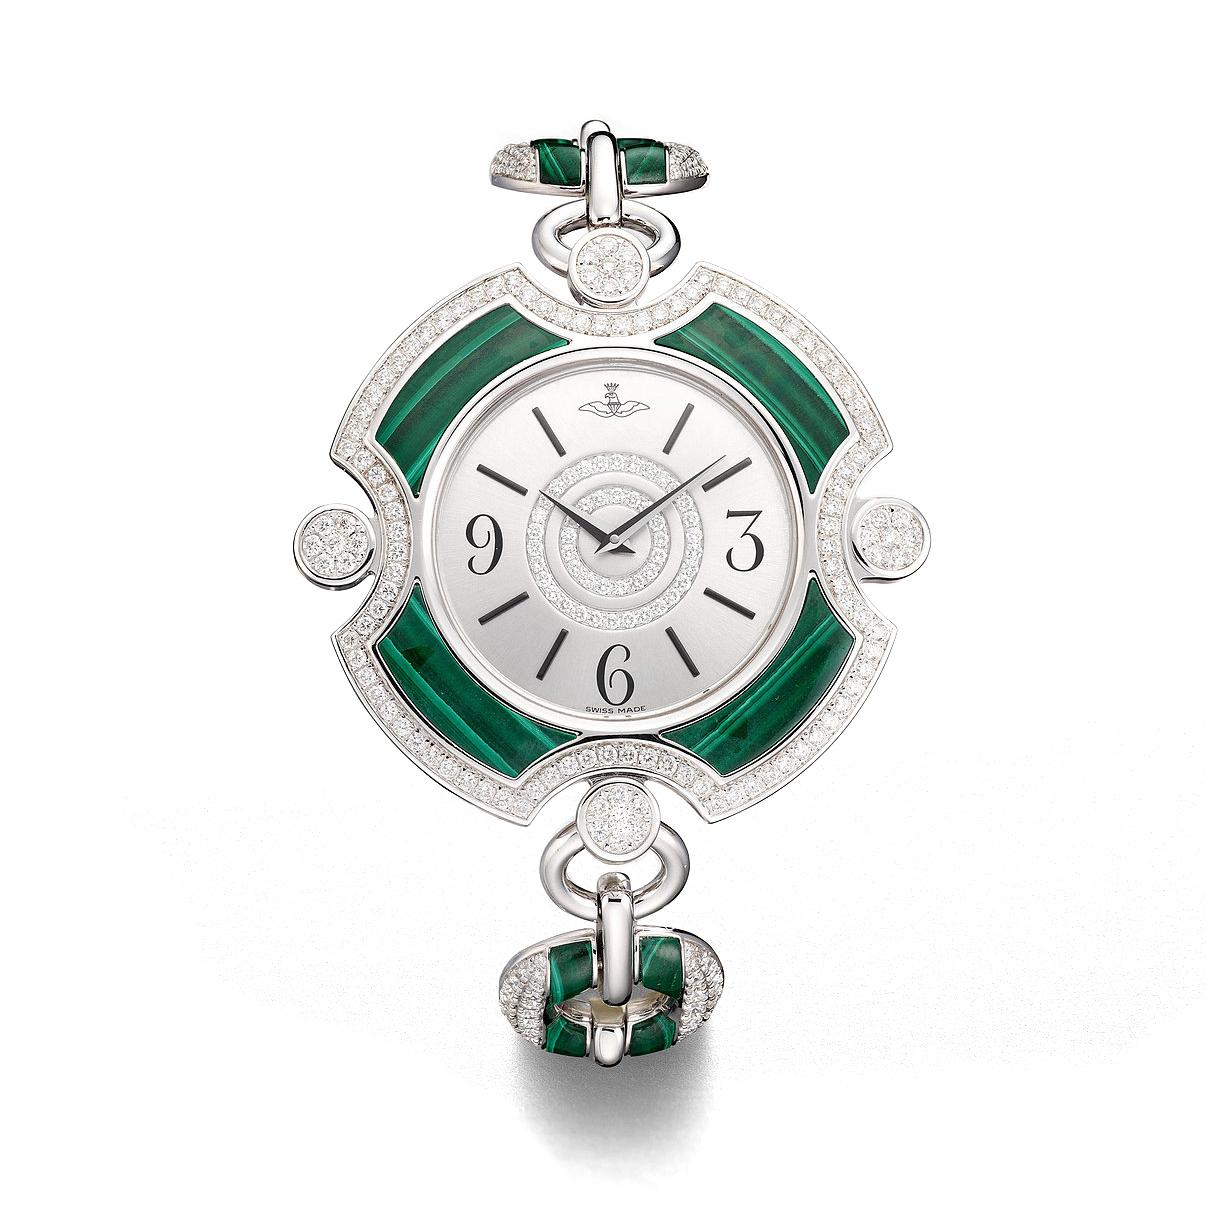 Watch in white gold 18kt set with 12 malachite 10.89 cts, case dial and bracelet set with 264 diamonds 3.03 cts quartz movement.

We do not guarantee the functioning of this watch.